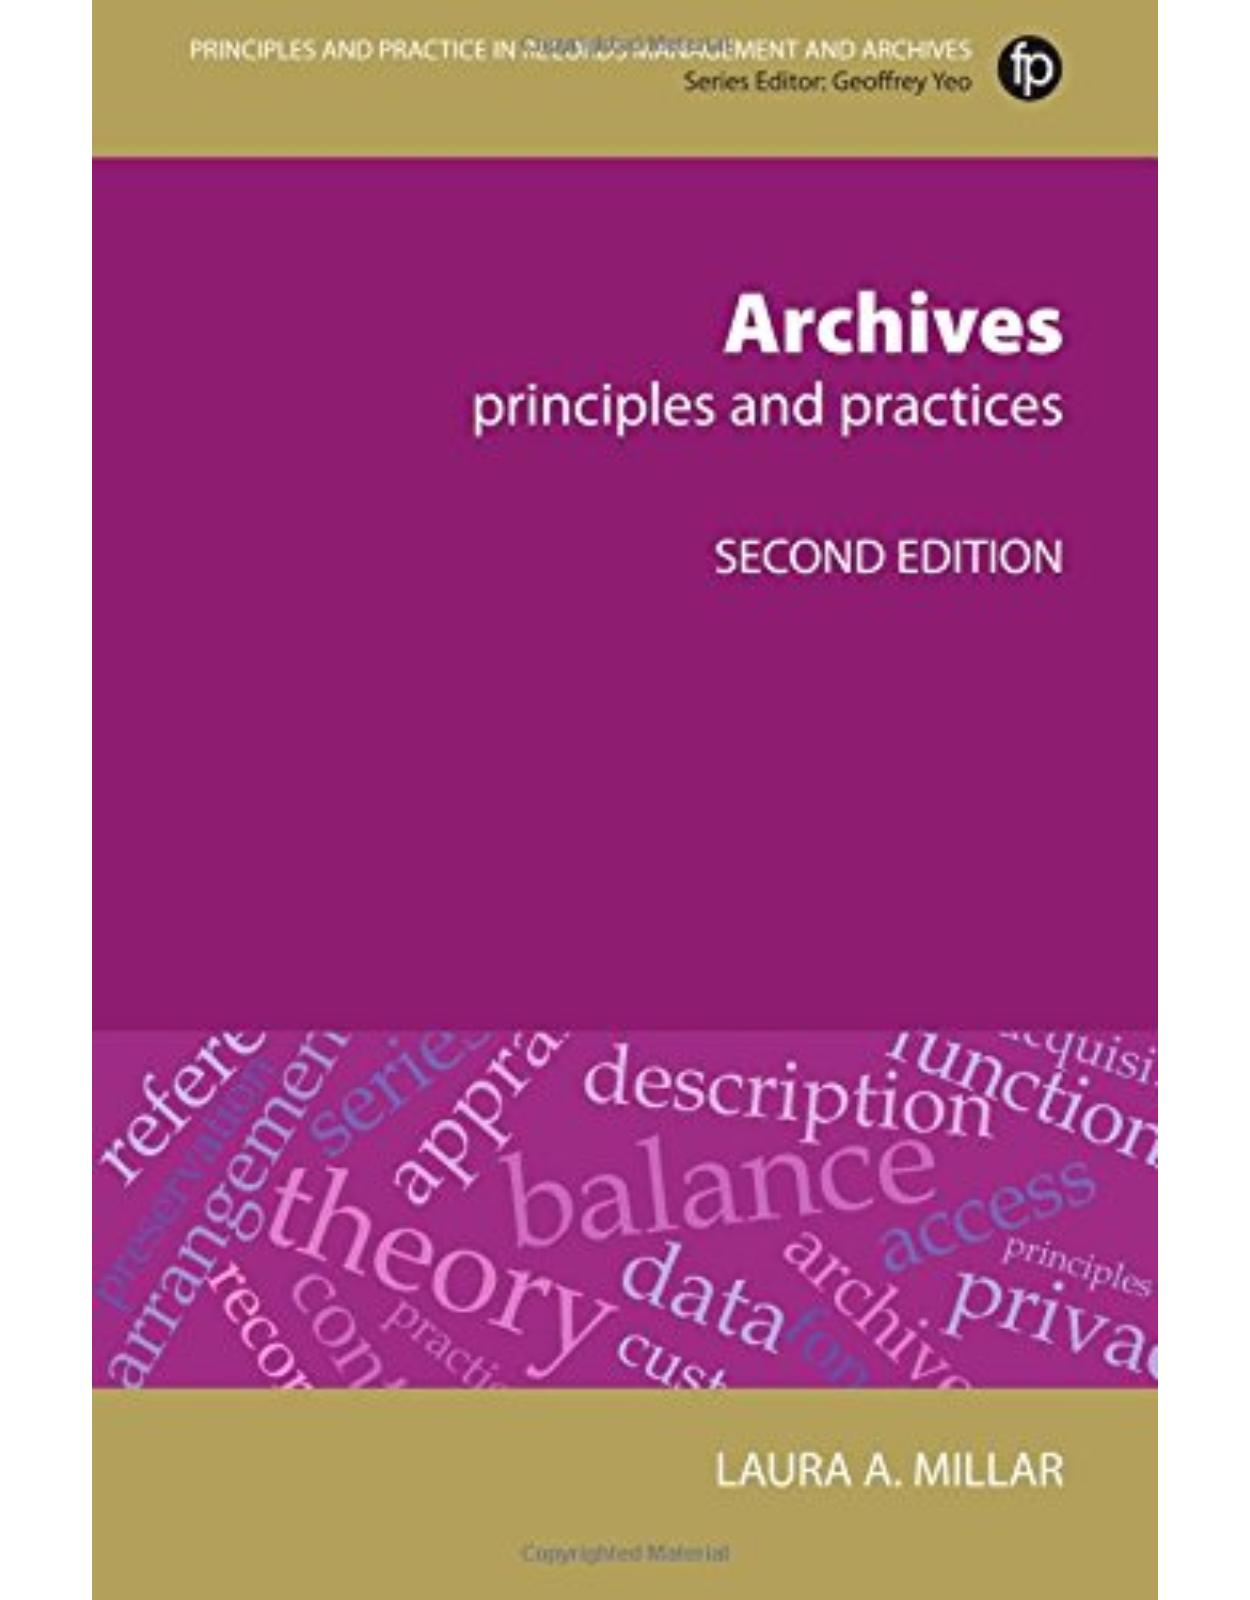 Archives: Principles and practices (Principles and Practice in Records Management and Archives)